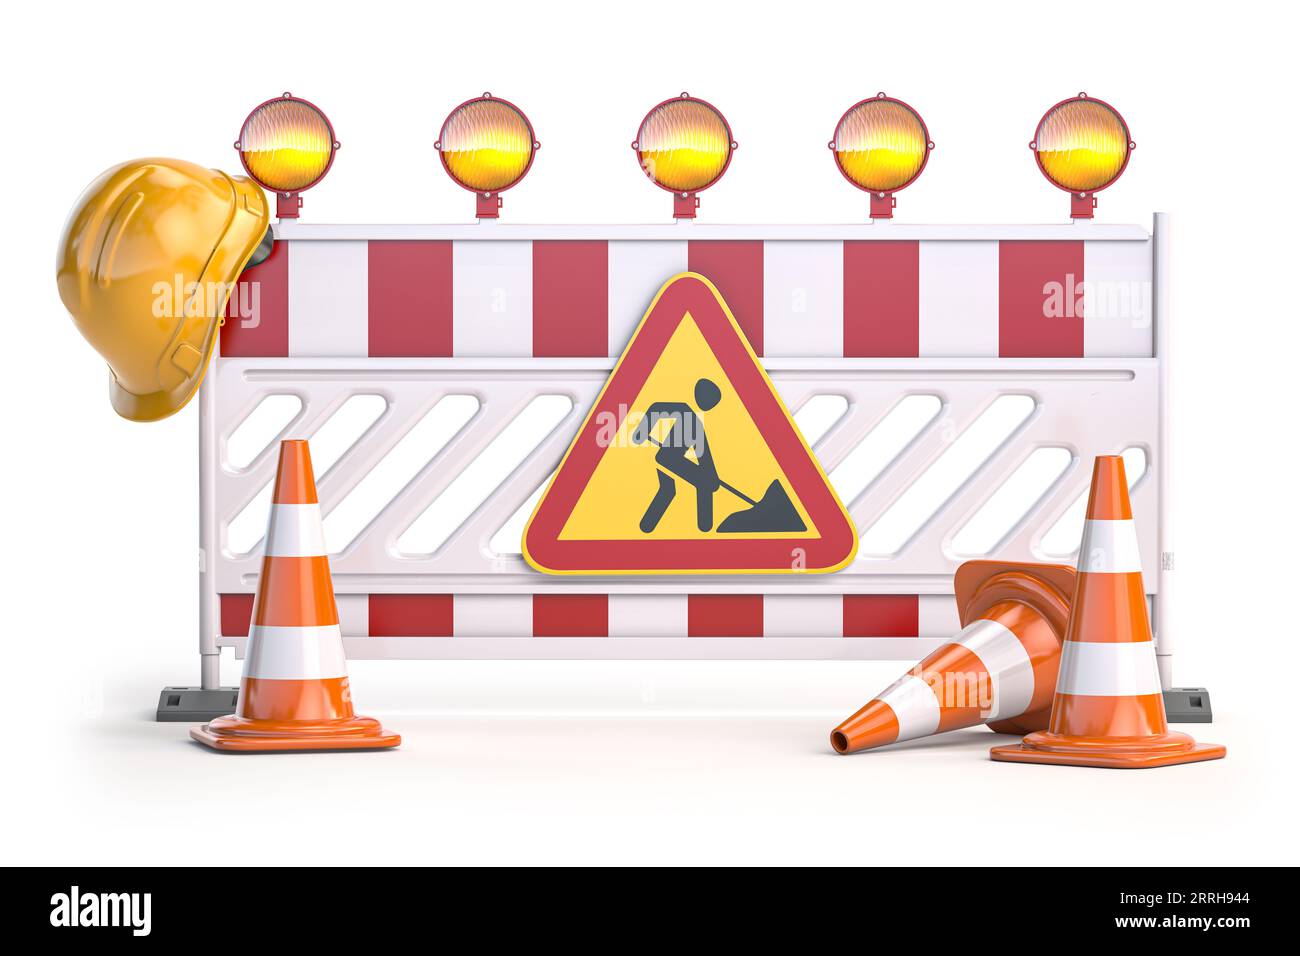 Under construction. Road barrier with trafic signs, cones and hard hat. 3d illustration. Stock Photo